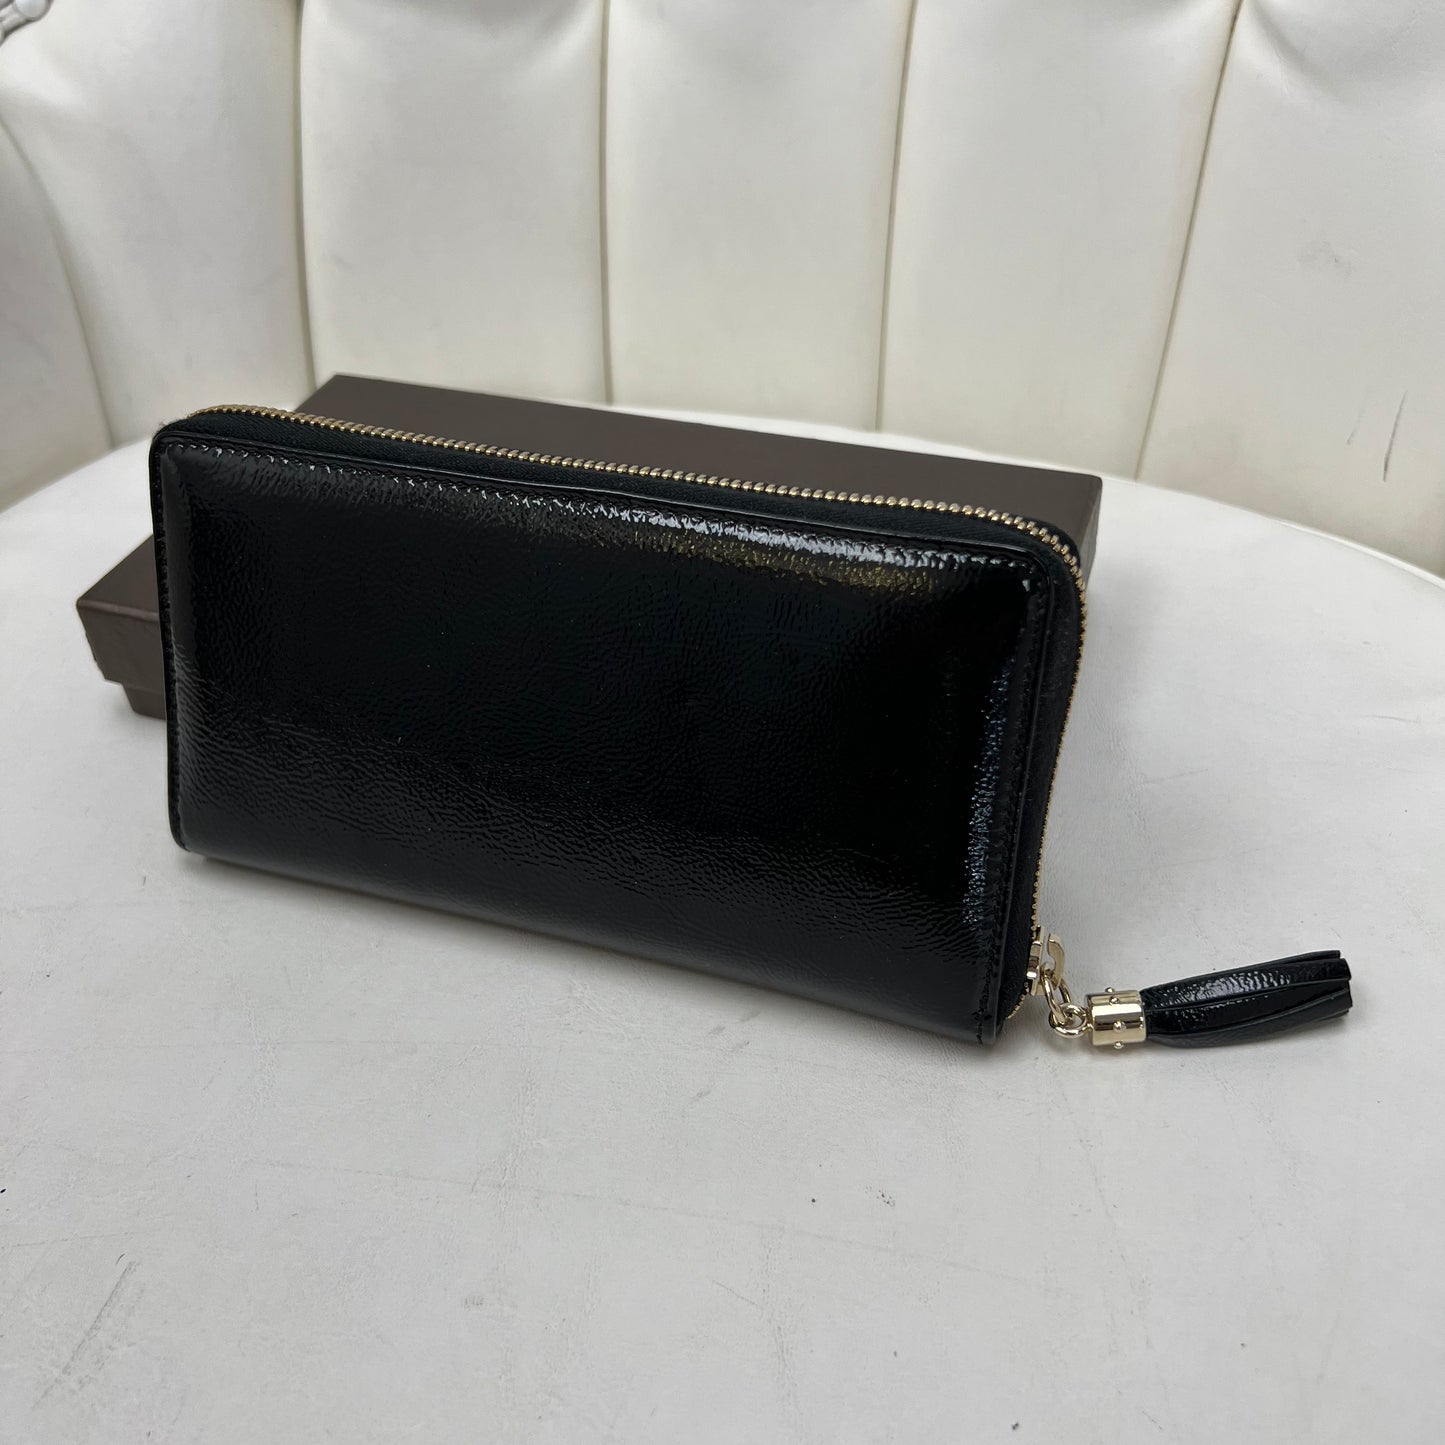 Gucci Patent Leather Wallet